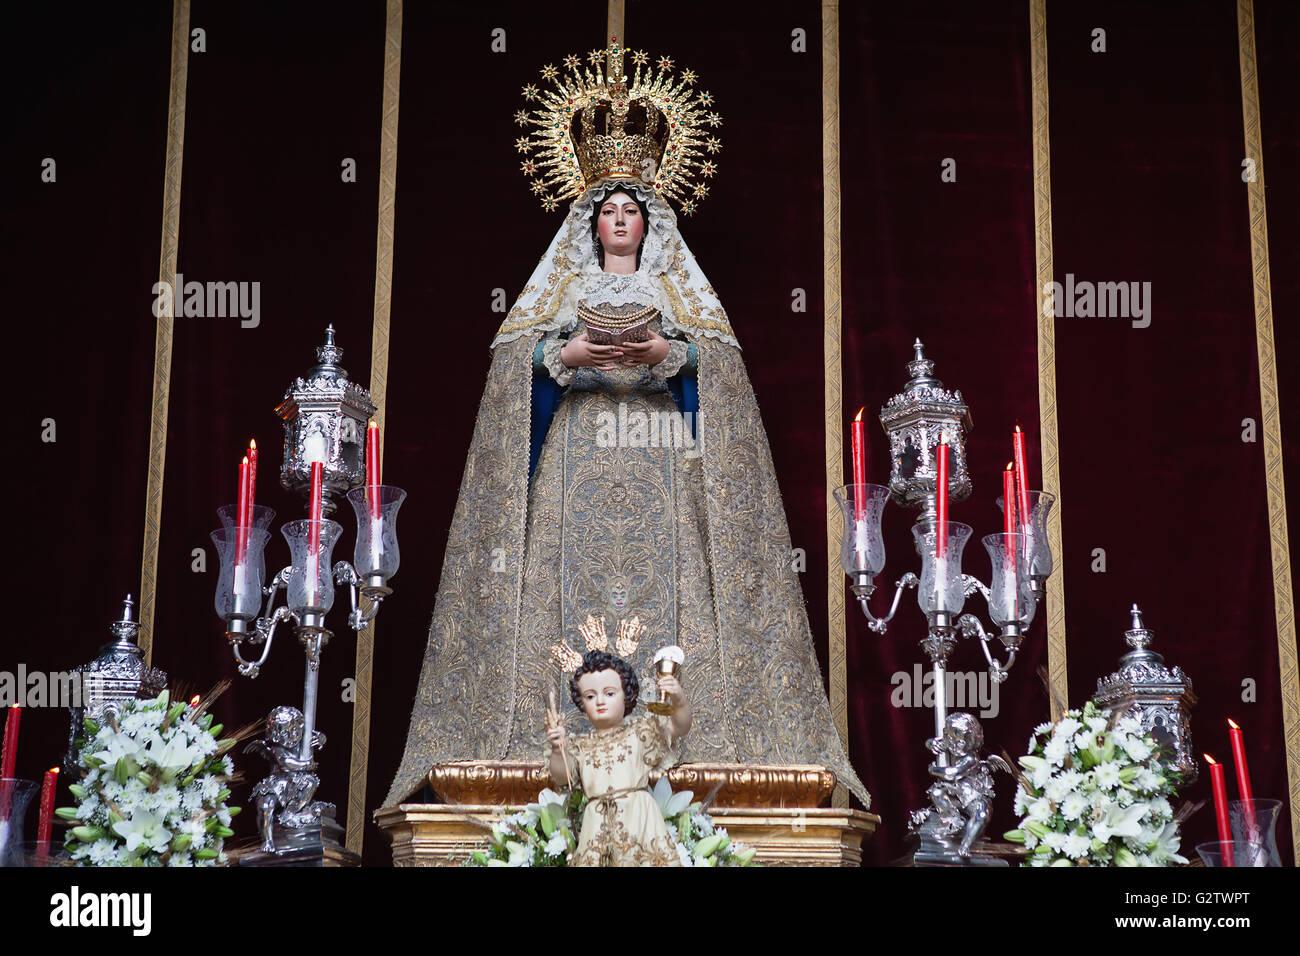 Spain, Andalucia, Seville, Shrine with the Virgin Mary on display at the Convento de San Leandro to celebrate the feast of Corpus Christi. Stock Photo